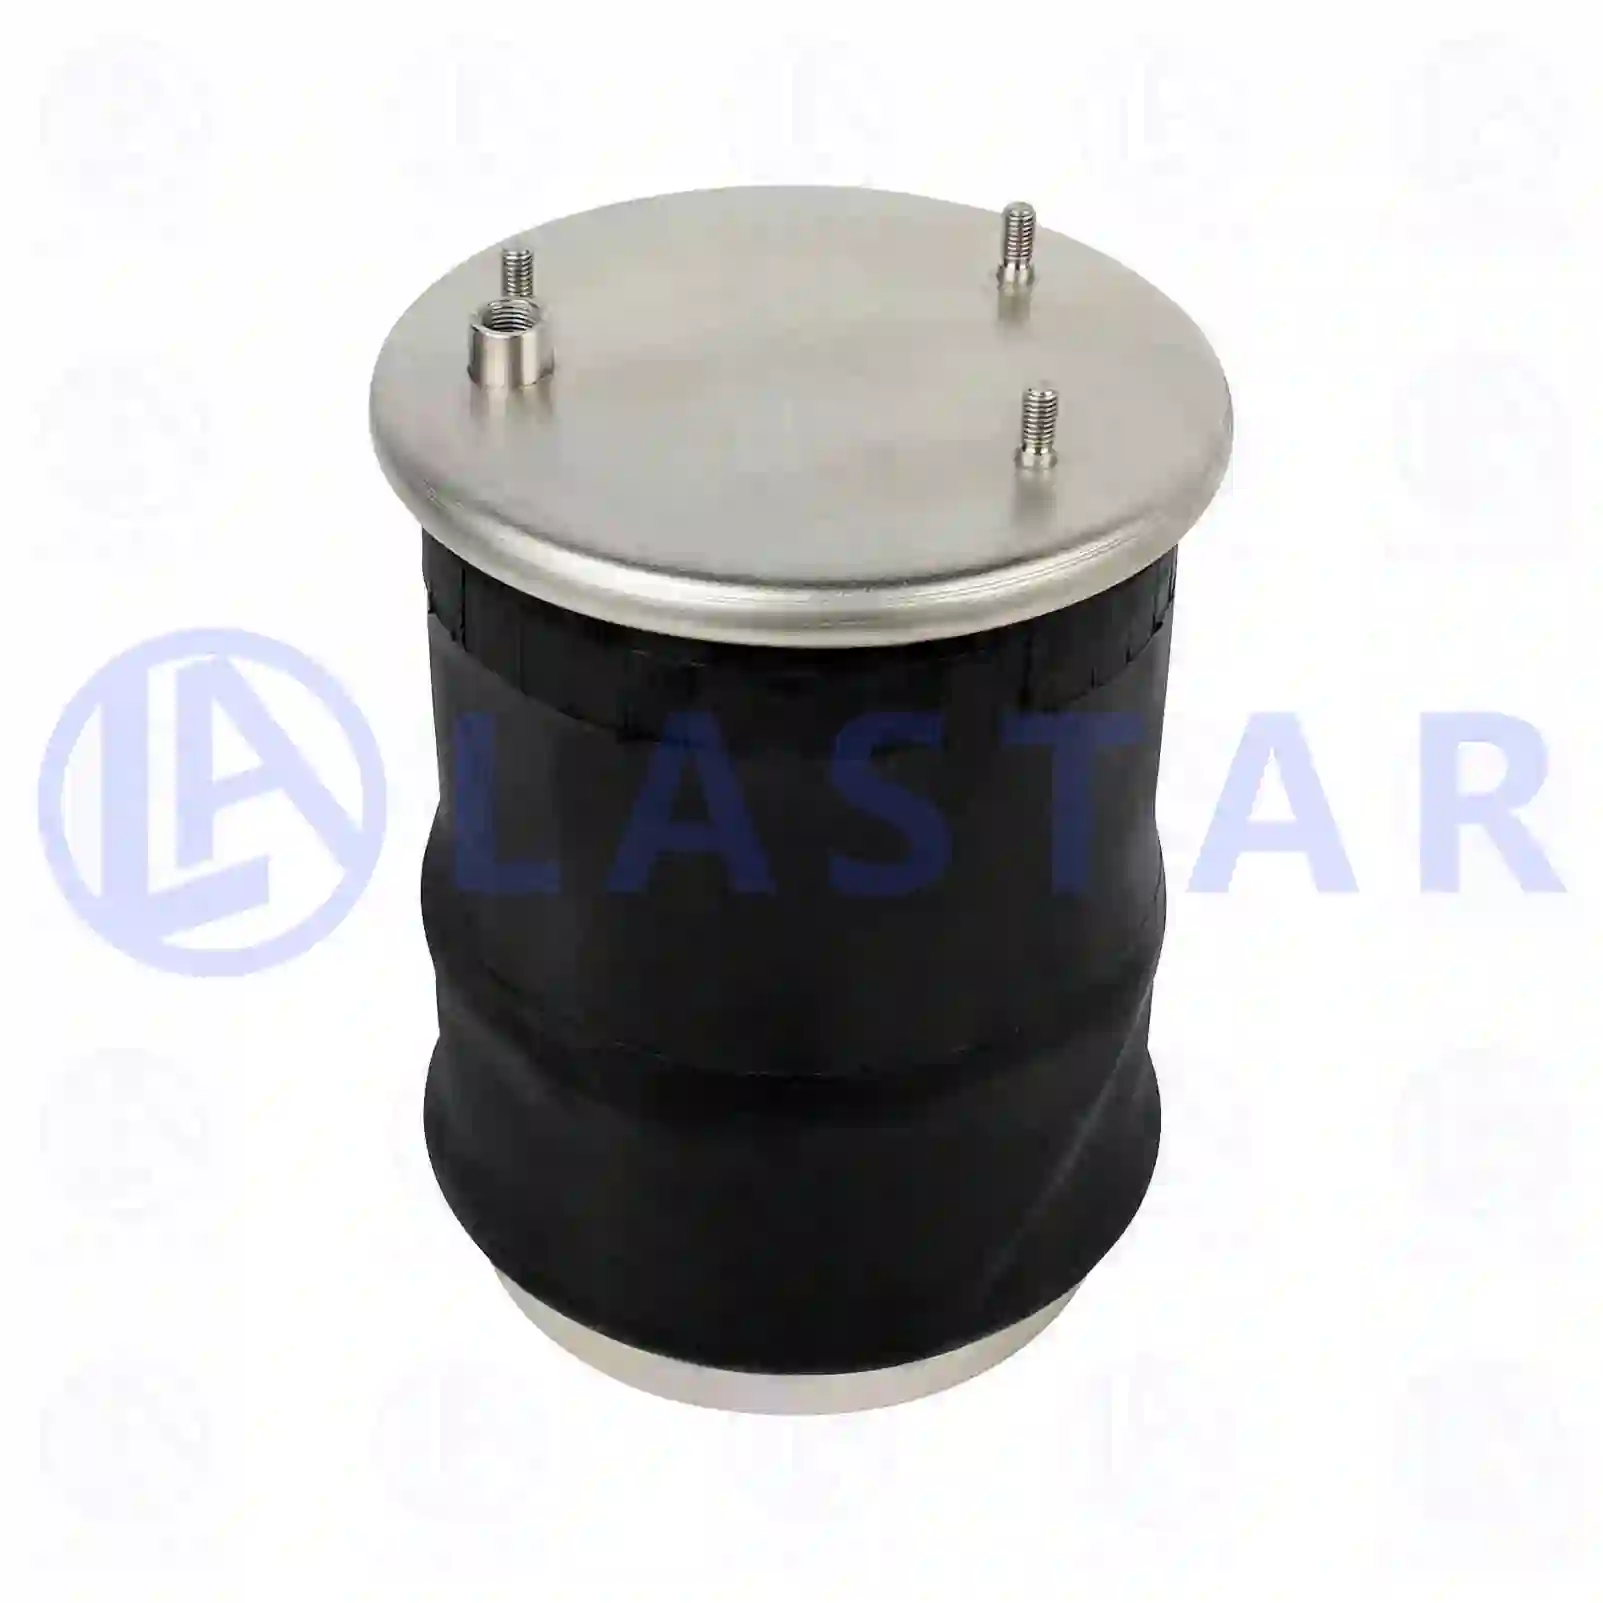 Air spring, with steel piston, 77727551, 1141525, 1154761, MLF7172 ||  77727551 Lastar Spare Part | Truck Spare Parts, Auotomotive Spare Parts Air spring, with steel piston, 77727551, 1141525, 1154761, MLF7172 ||  77727551 Lastar Spare Part | Truck Spare Parts, Auotomotive Spare Parts